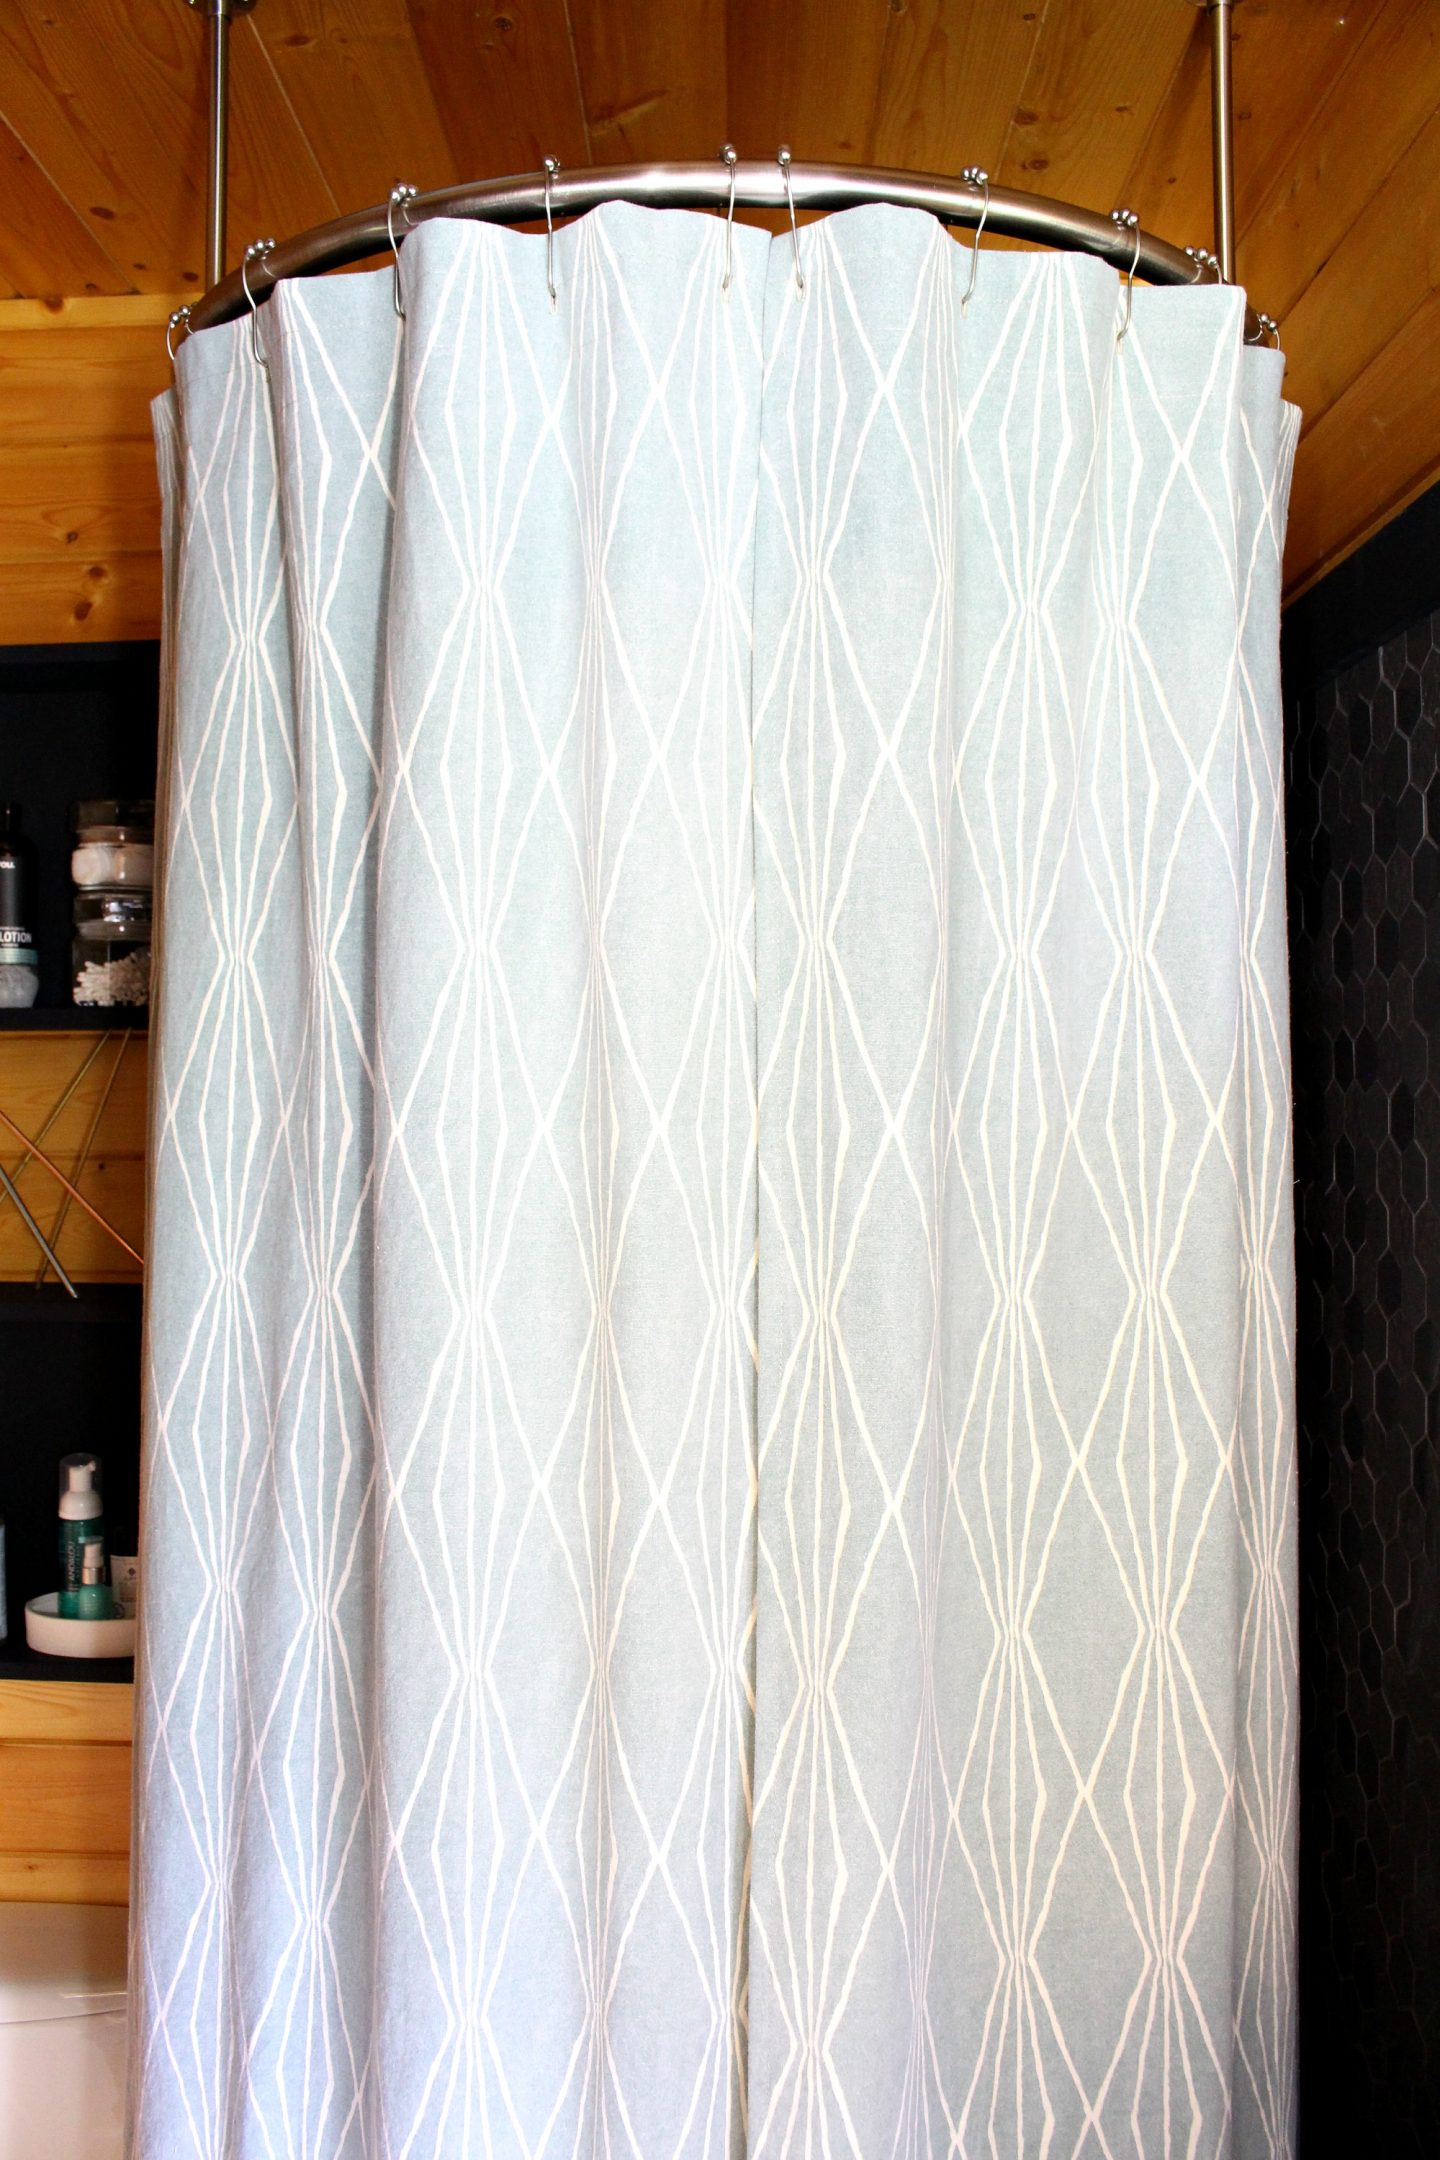 How To Sew A Shower Curtain With Lining, Homemade Shower Curtain Ideas